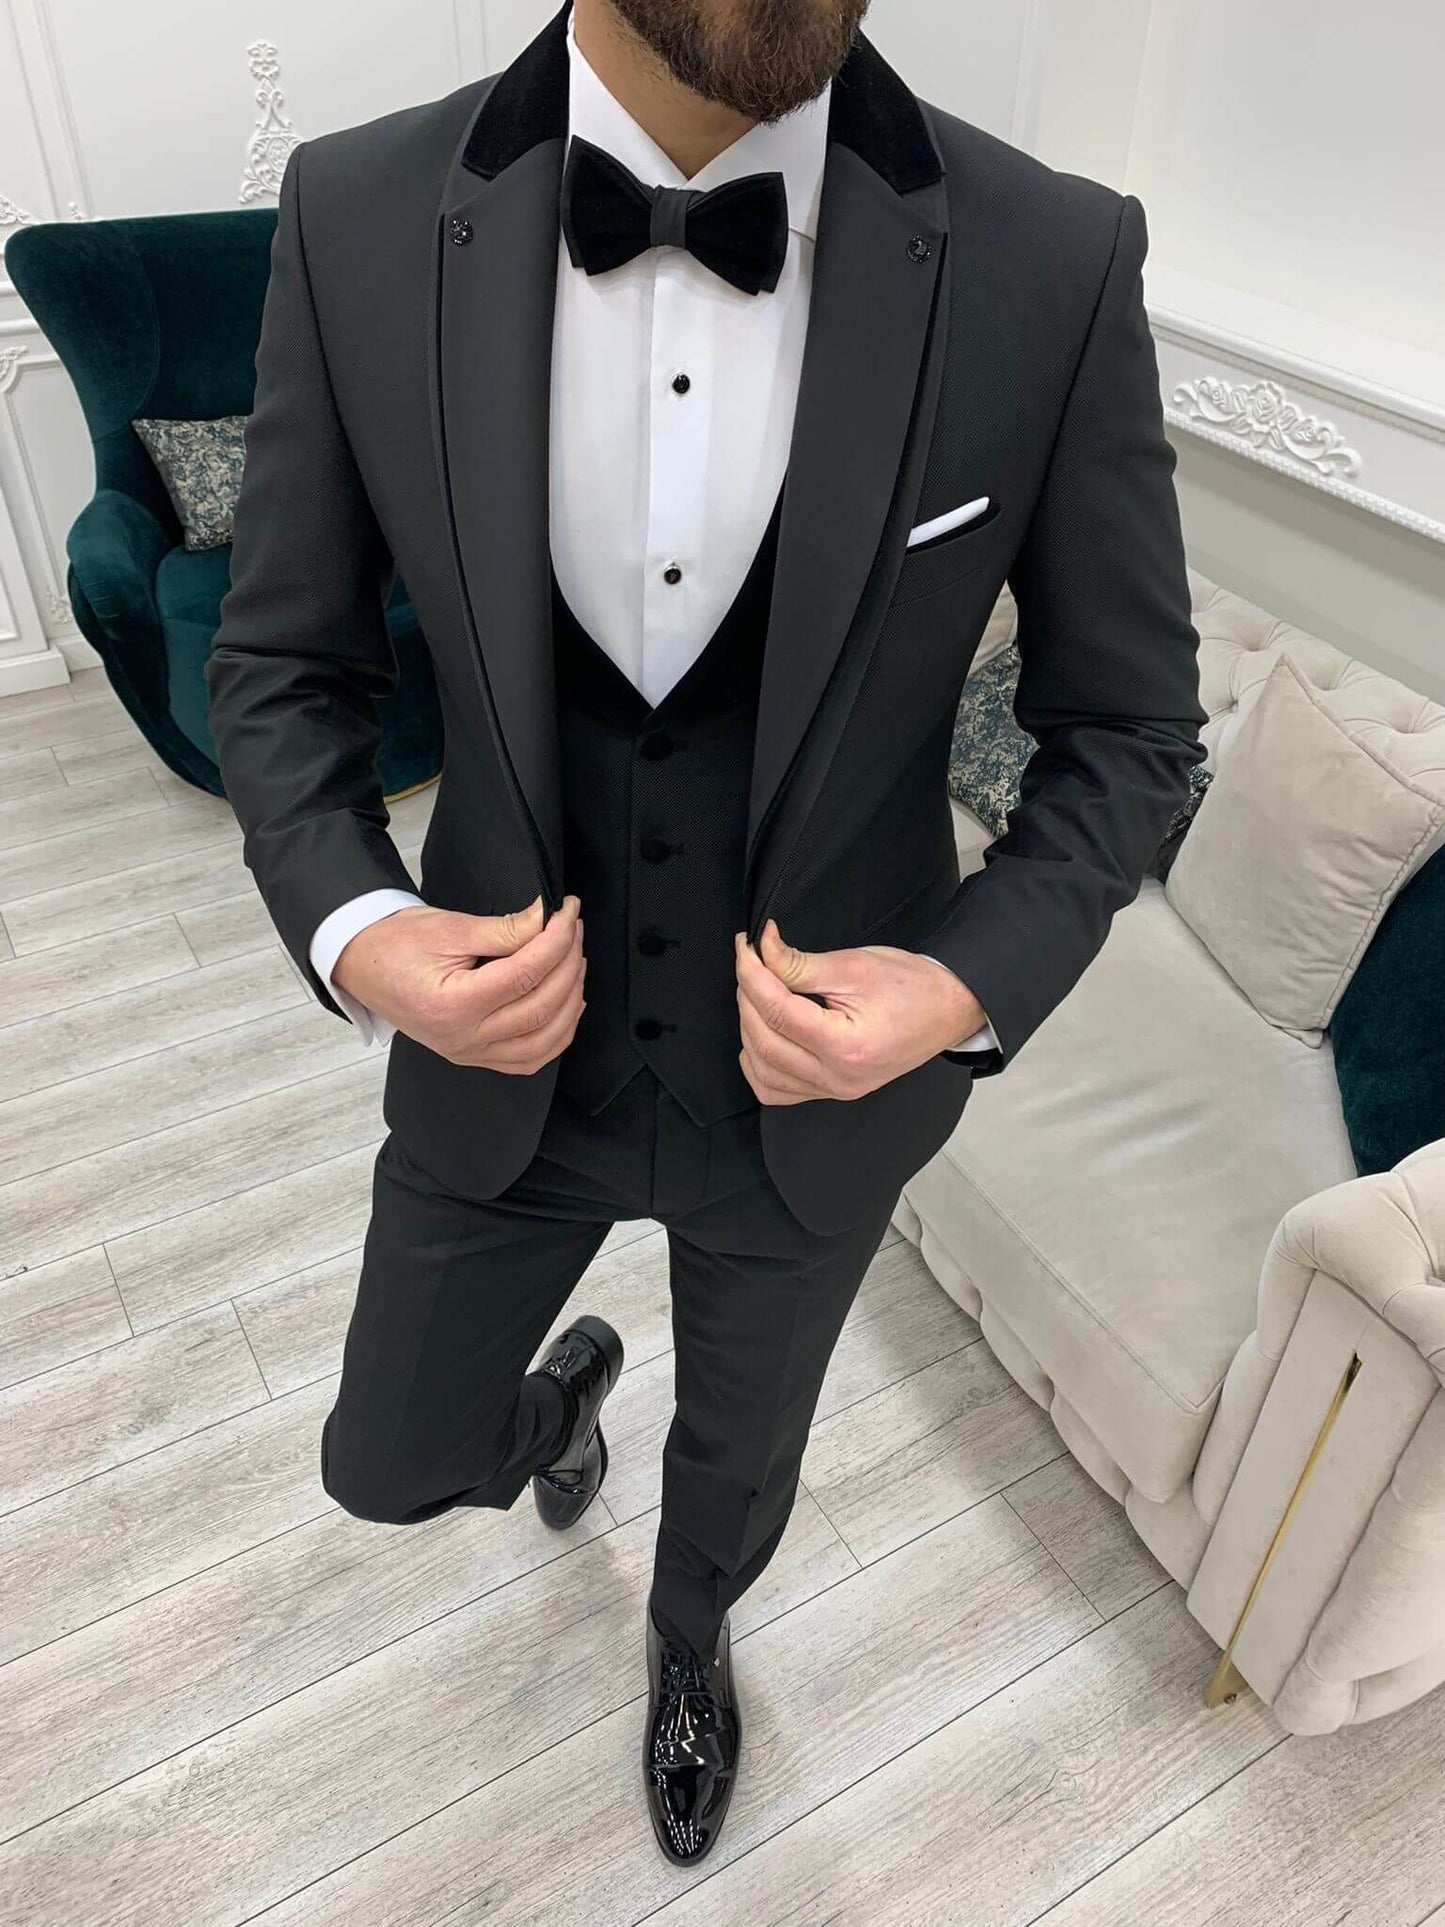 Model Wearing Black Tuxedo with Unique Shawl Lapel, Single Button, Double Slit, Slim-Fit Italian Cut at Formal Event